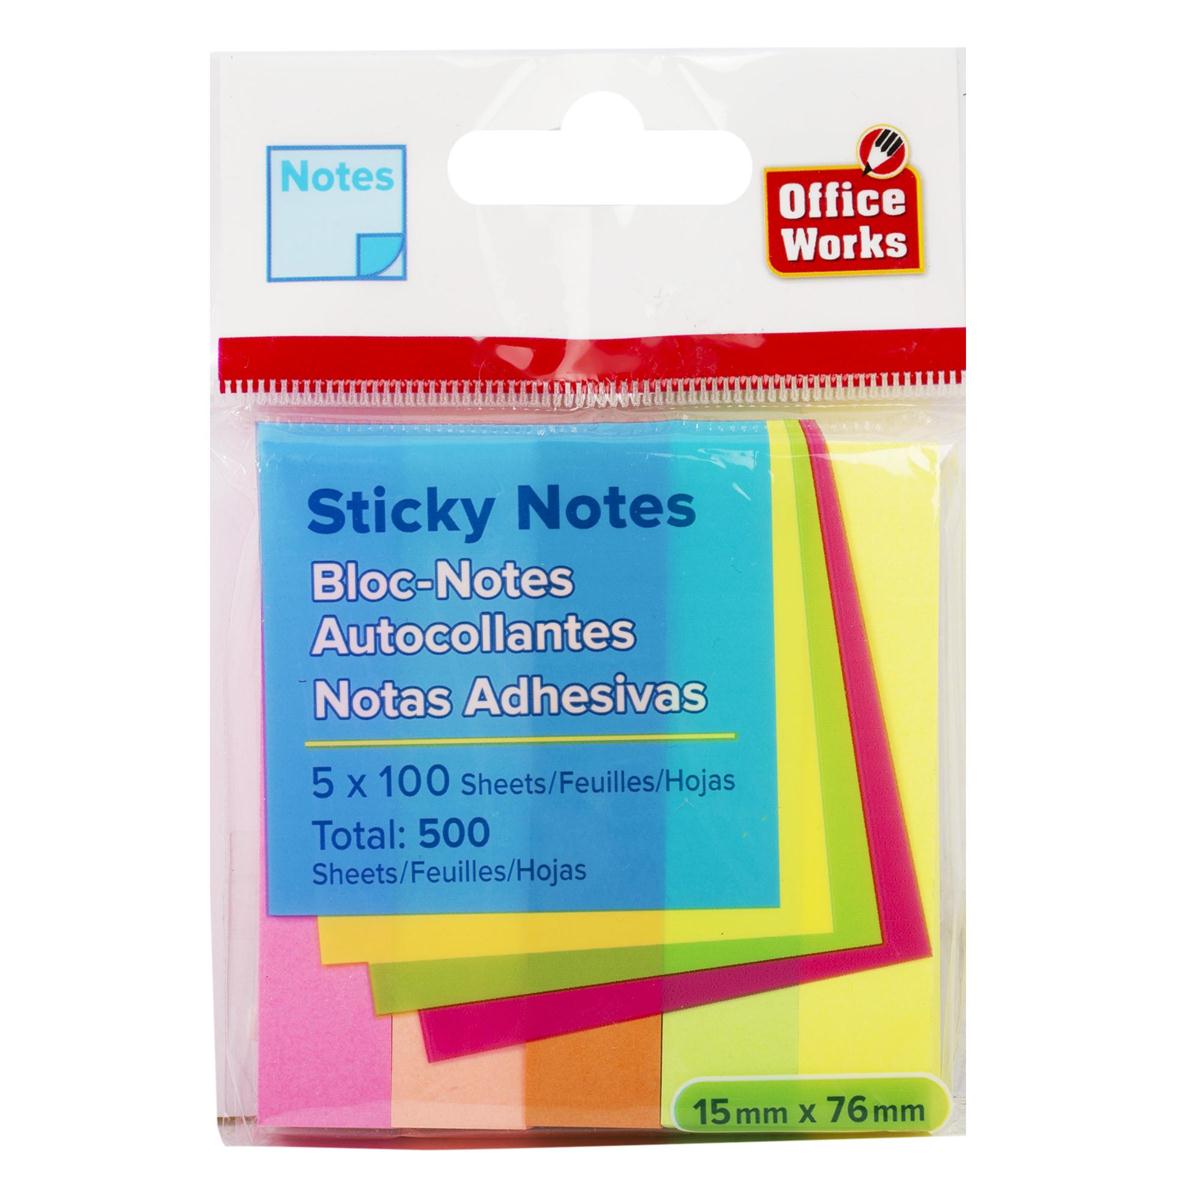 O.WKs 100 sh Sticky Notes 5 pk 76x 15 mm Neon Colo